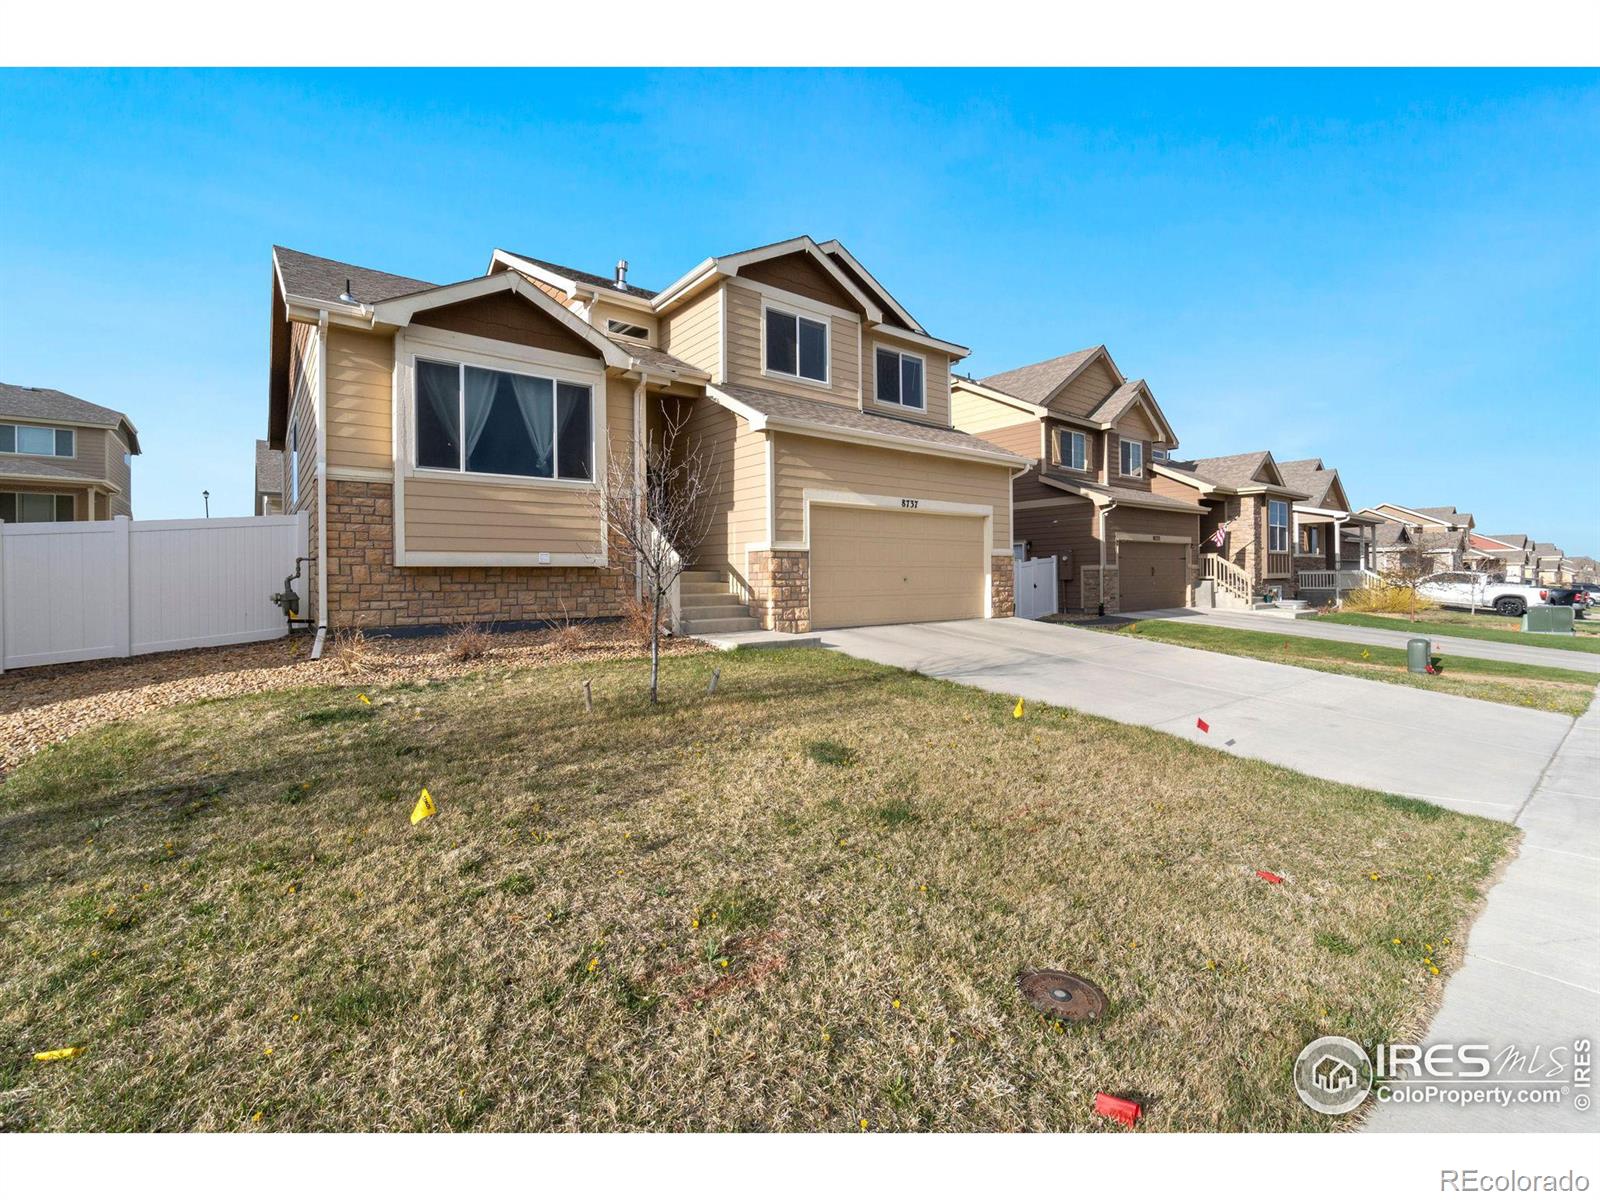 8737  13th St Rd, greeley MLS: 456789995727 Beds: 4 Baths: 4 Price: $435,000